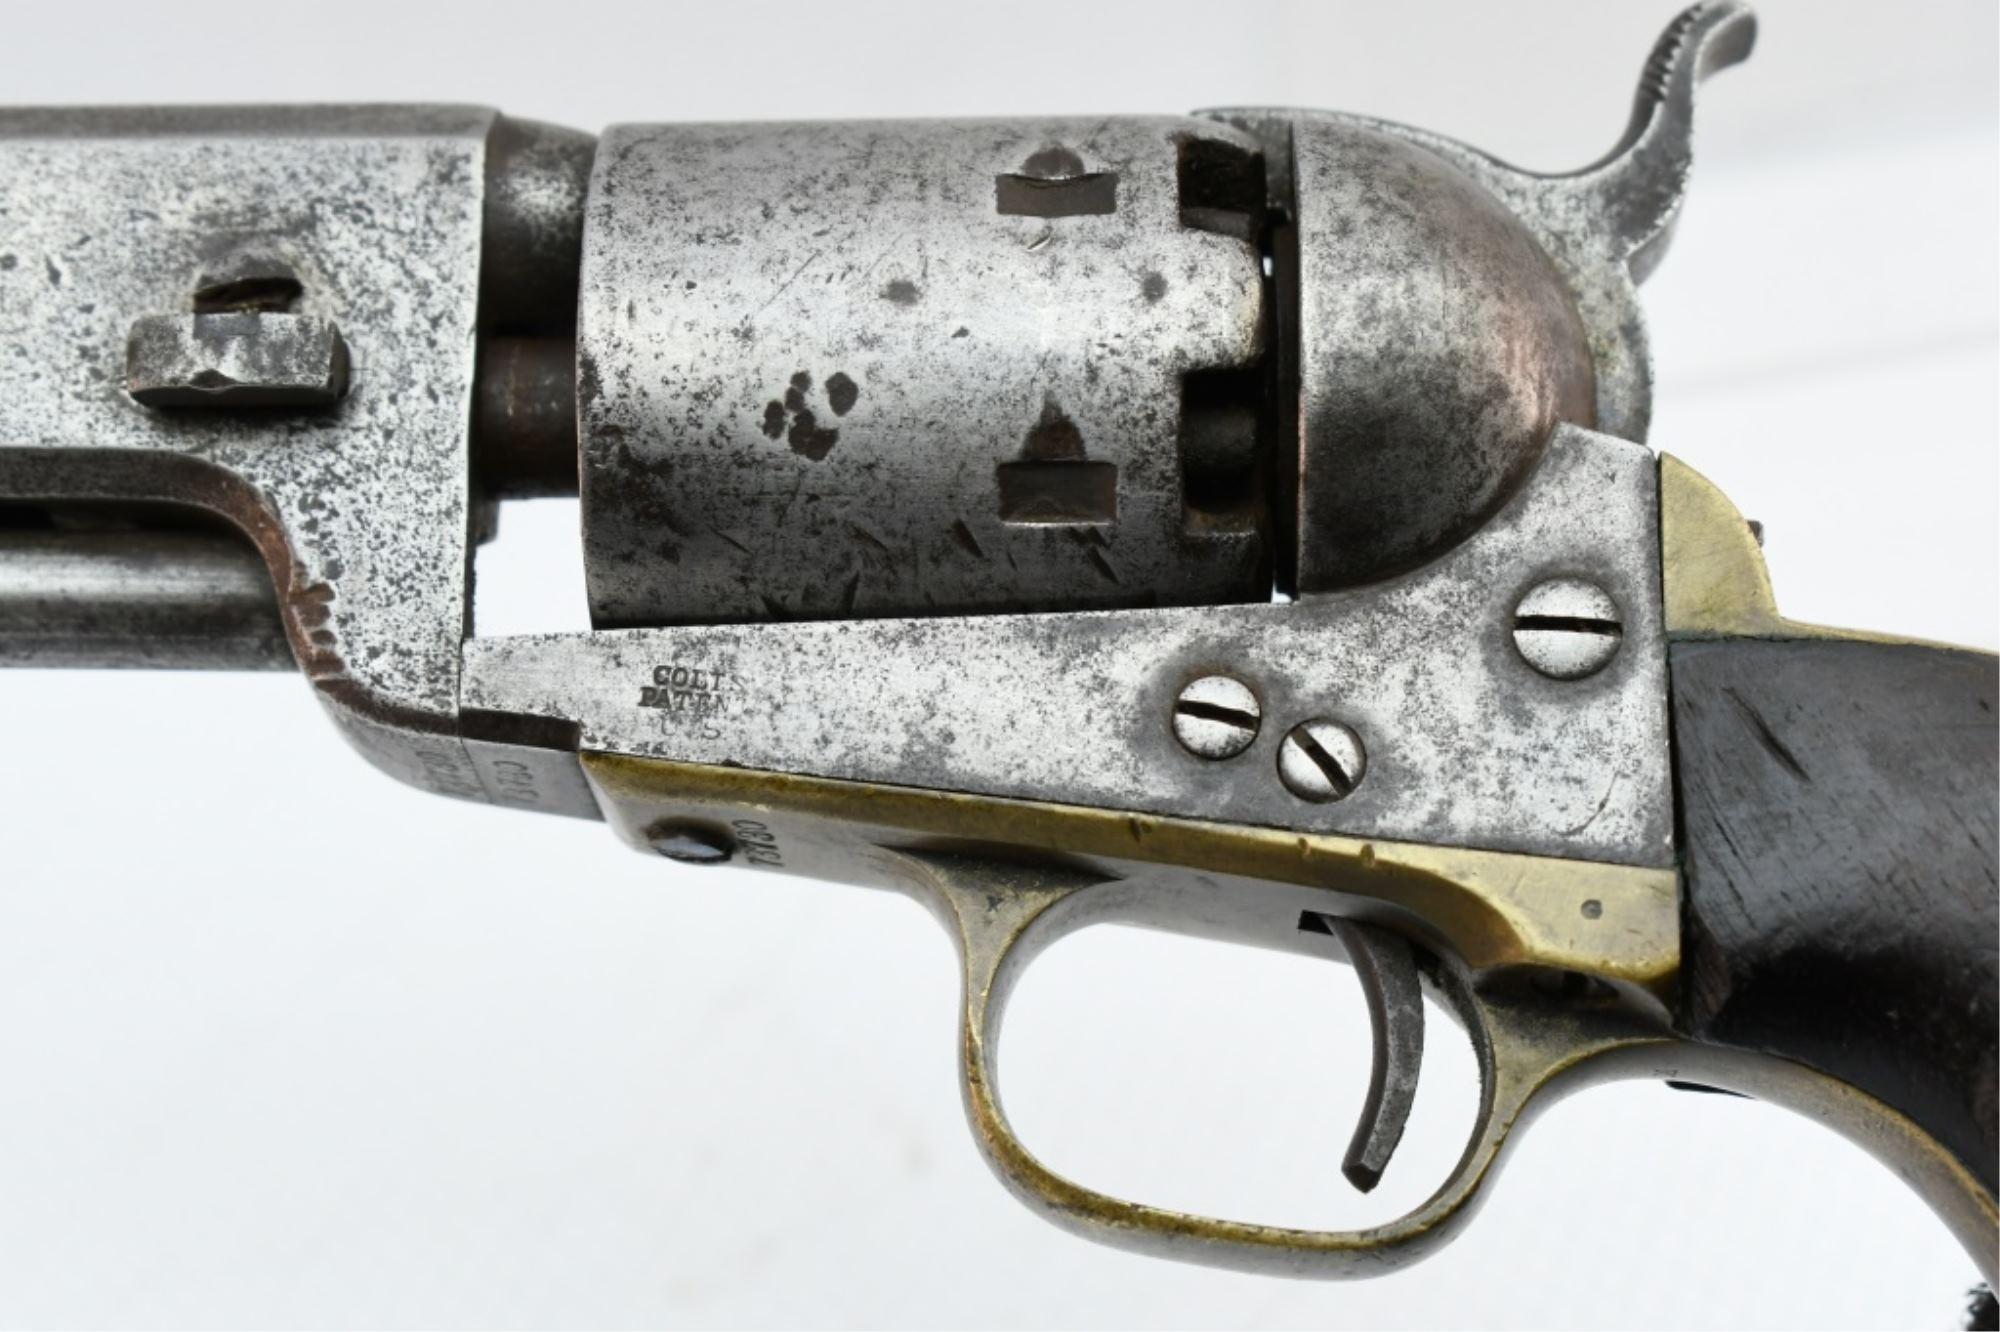 1857 Martially Marked - U.S. Colt M1851 "Army" Navy, .36 Percussion Revolver, SN - 73730